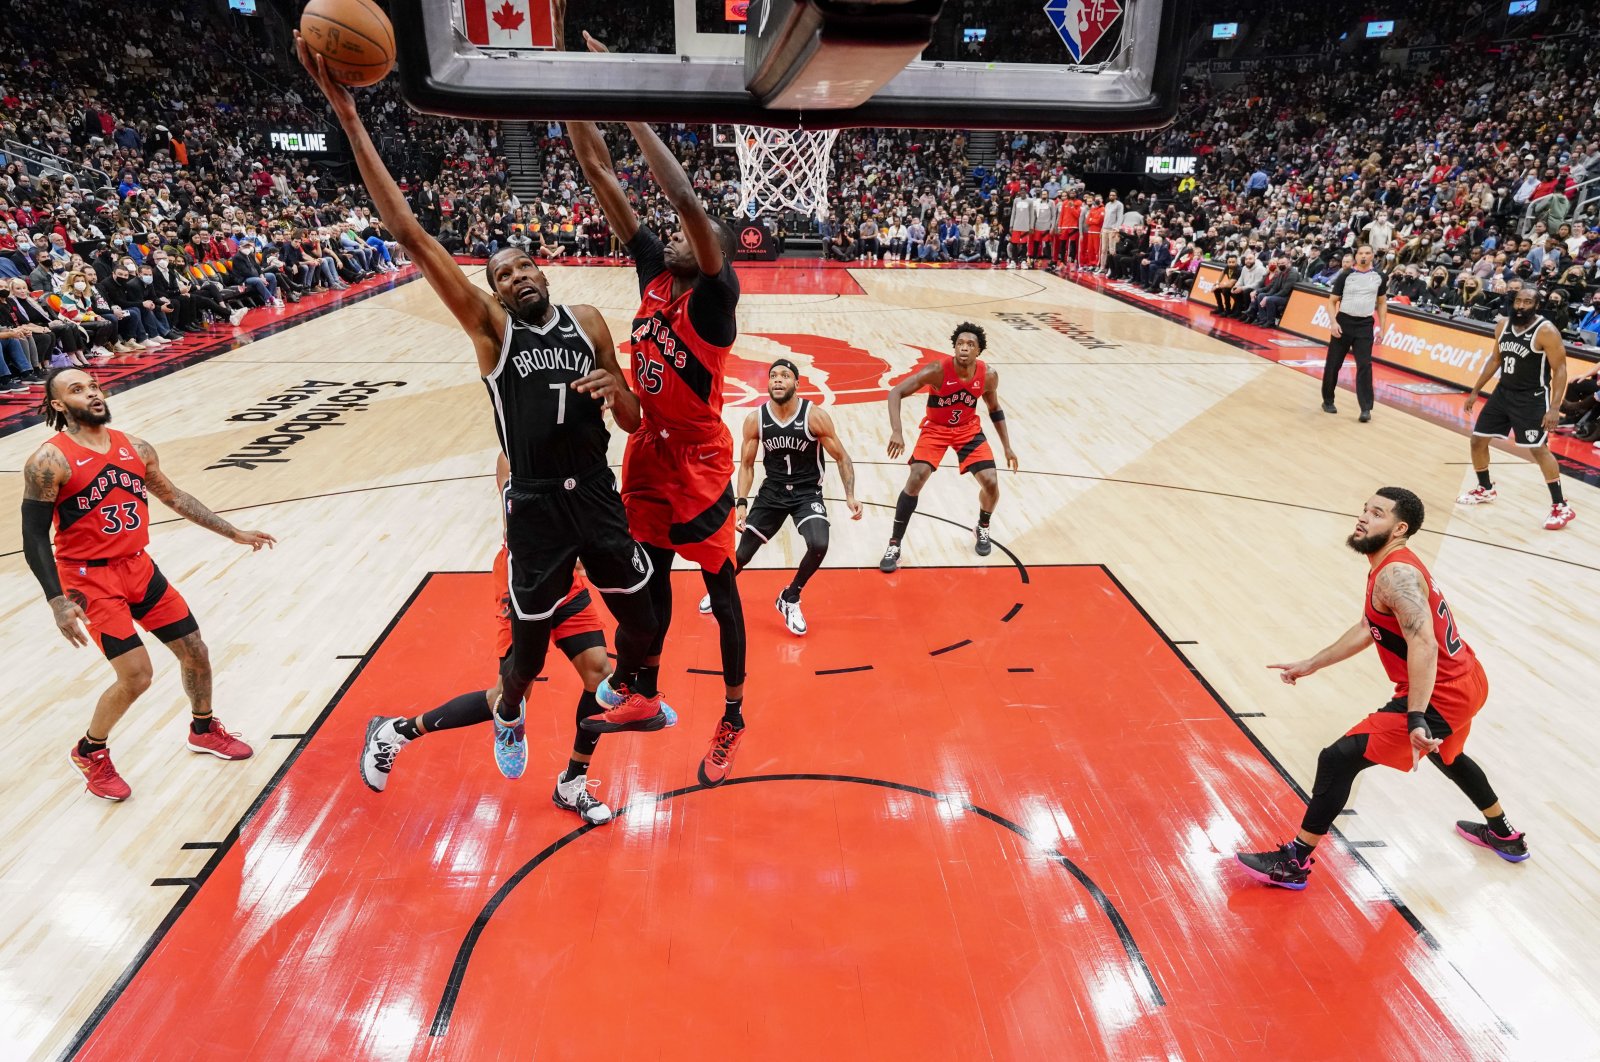 Brooklyn Nets forward Kevin Durant (2nd L) drives to the net against Toronto Raptors forward Chris Boucher (C) during an NBA match at Scotiabank Arena, Toronto, Ontario, Canada, Nov 7, 2021. (Reuters Photo)